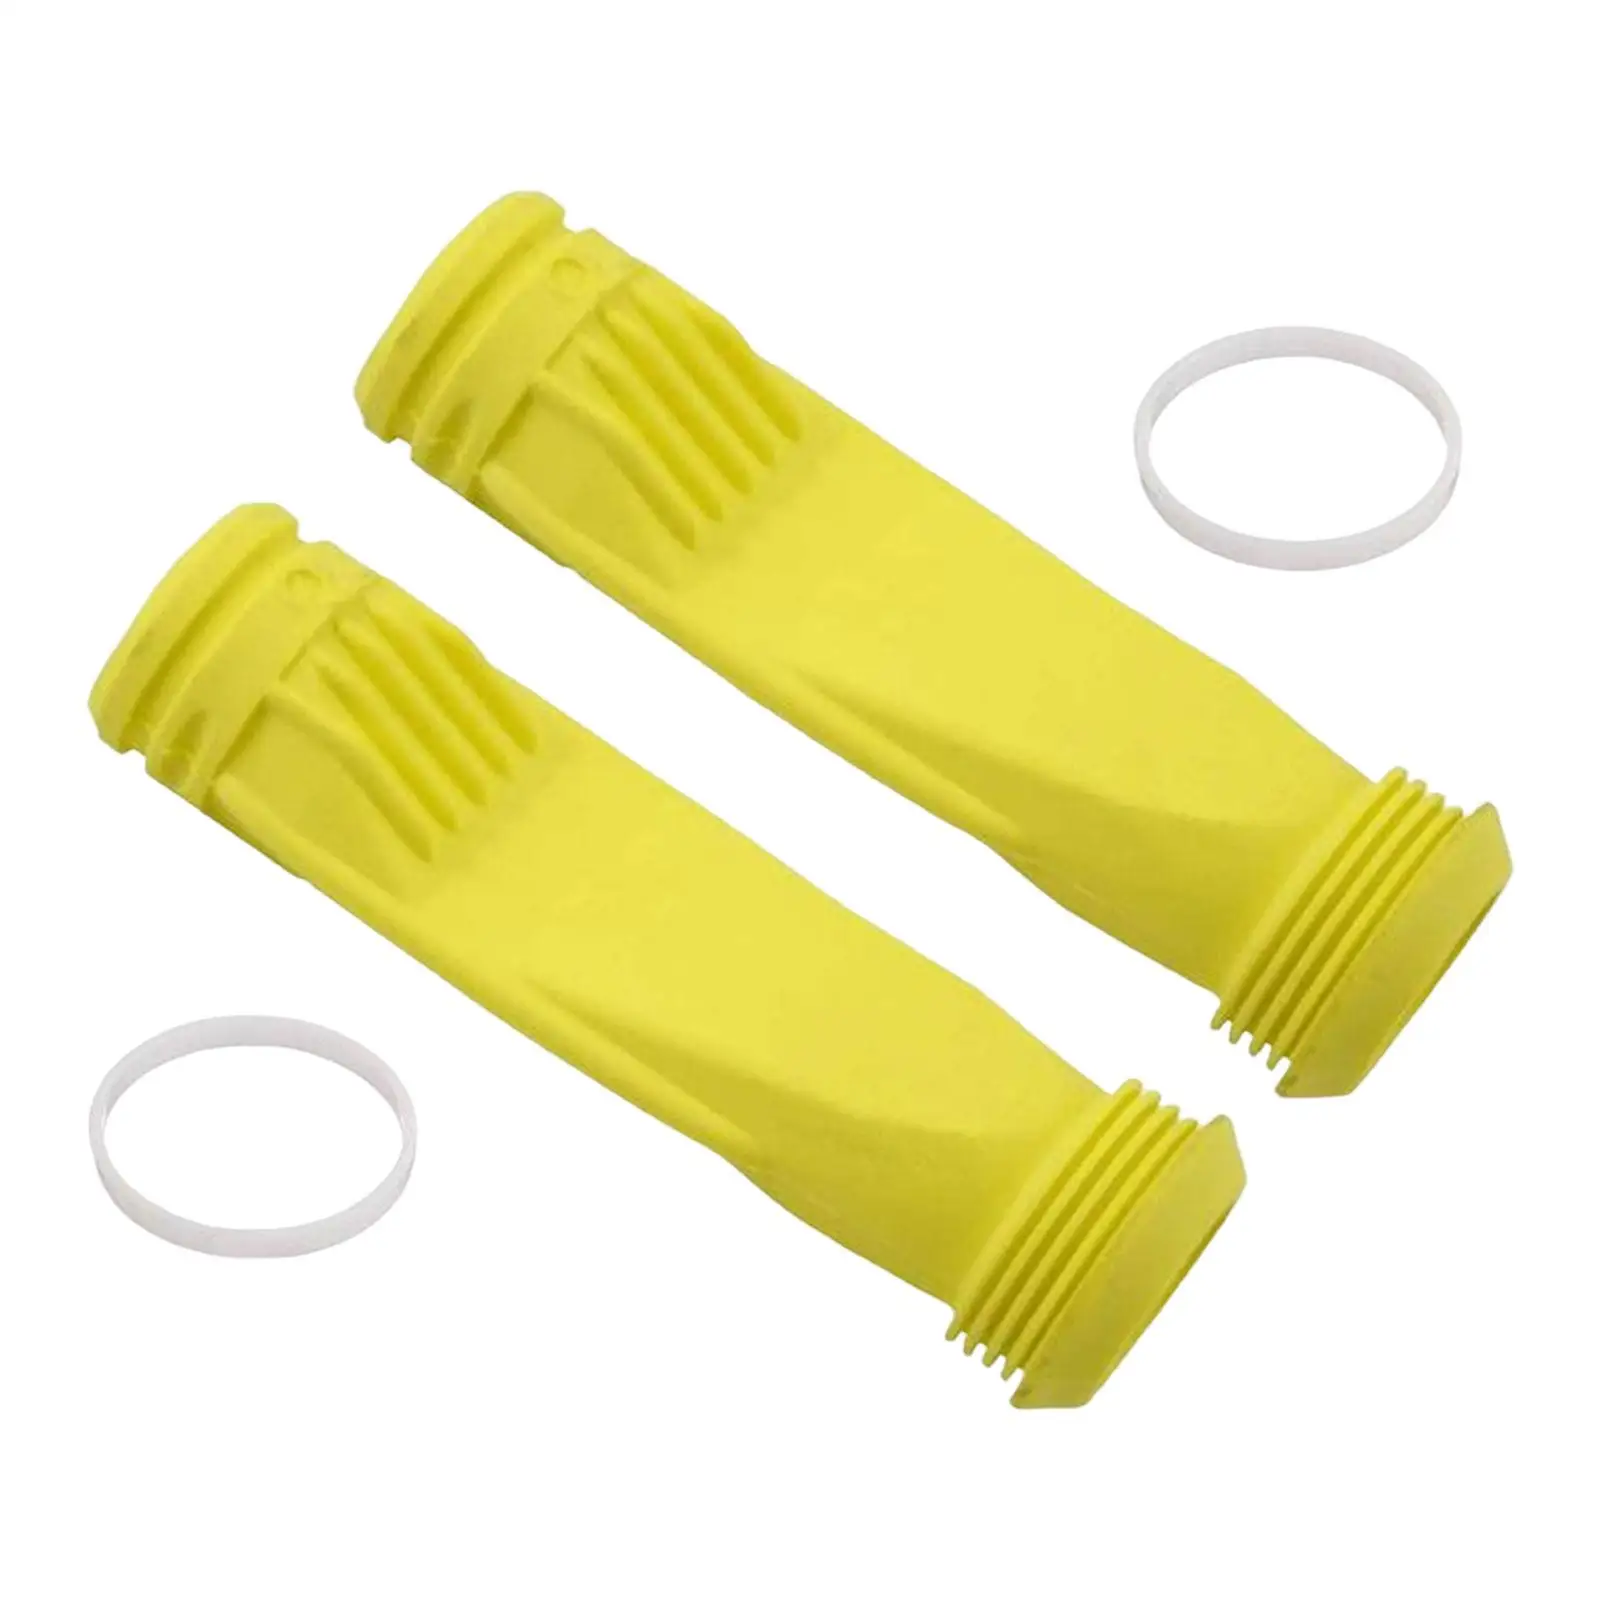 2 Pieces Pool Cleaner Diaphragm Good Performance Universal Durable Long Service Life Easily Install Premium Replaces Heavy Duty